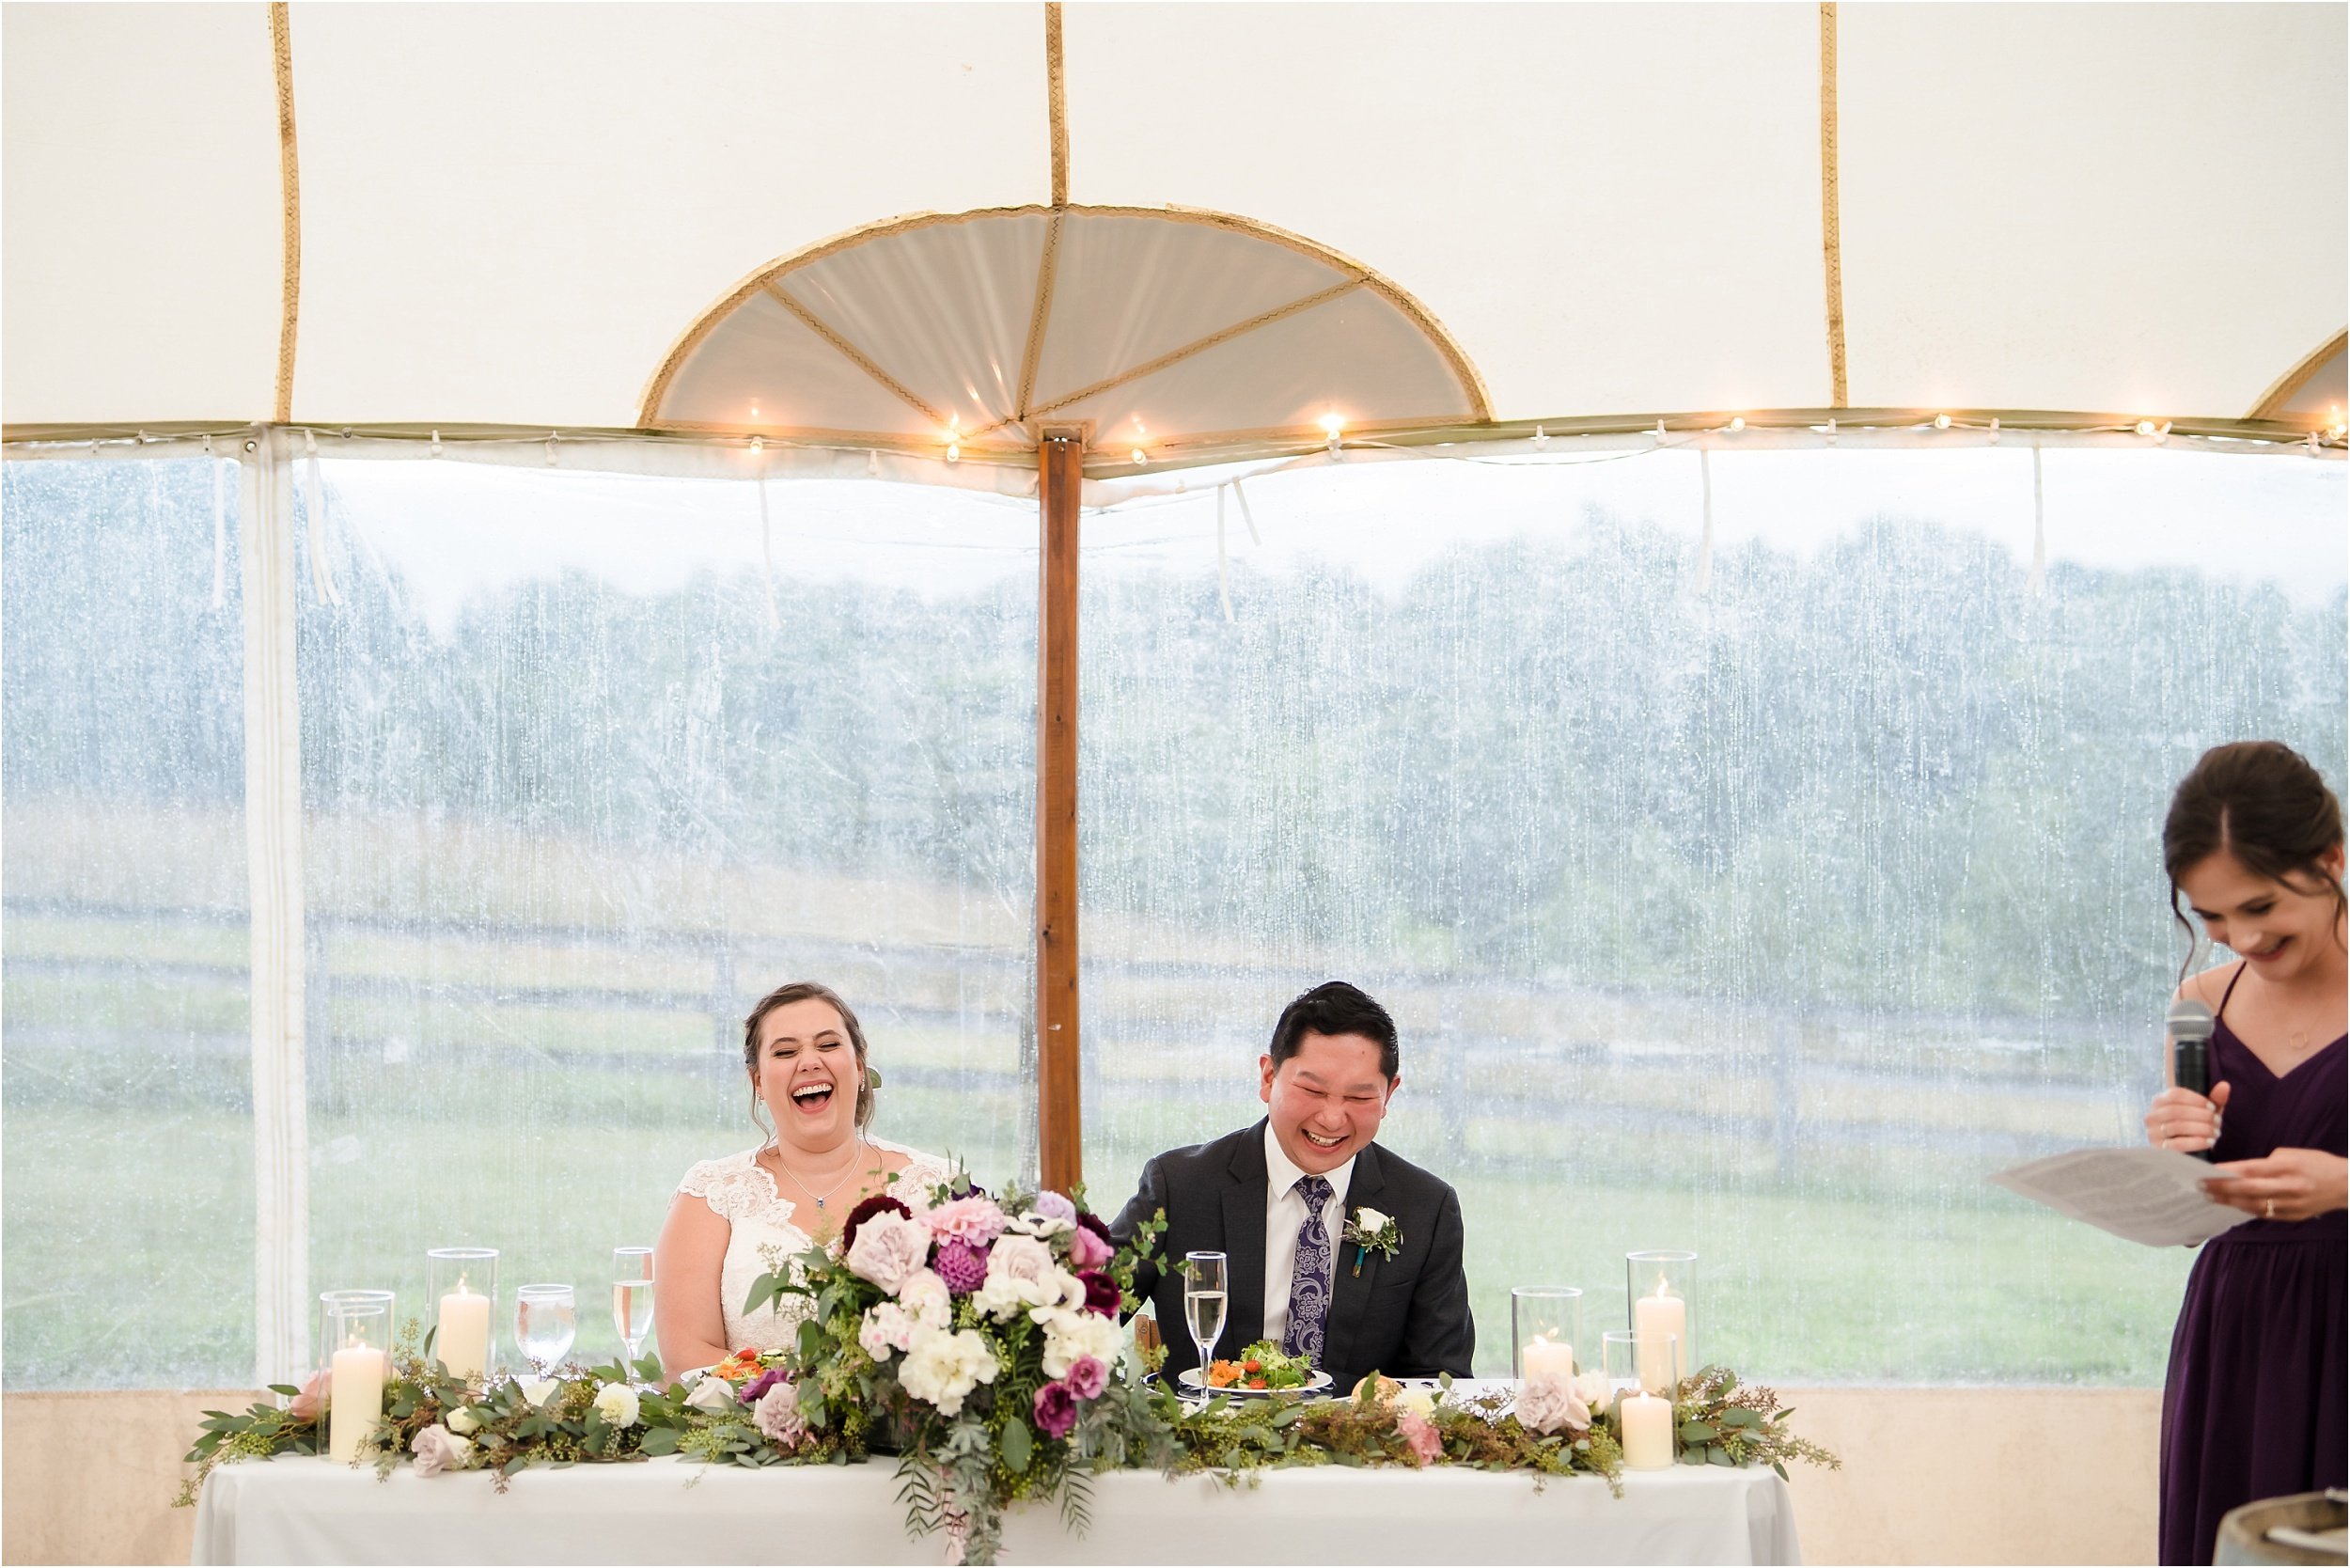  A bride laughs loudly at her friend’s speech.  